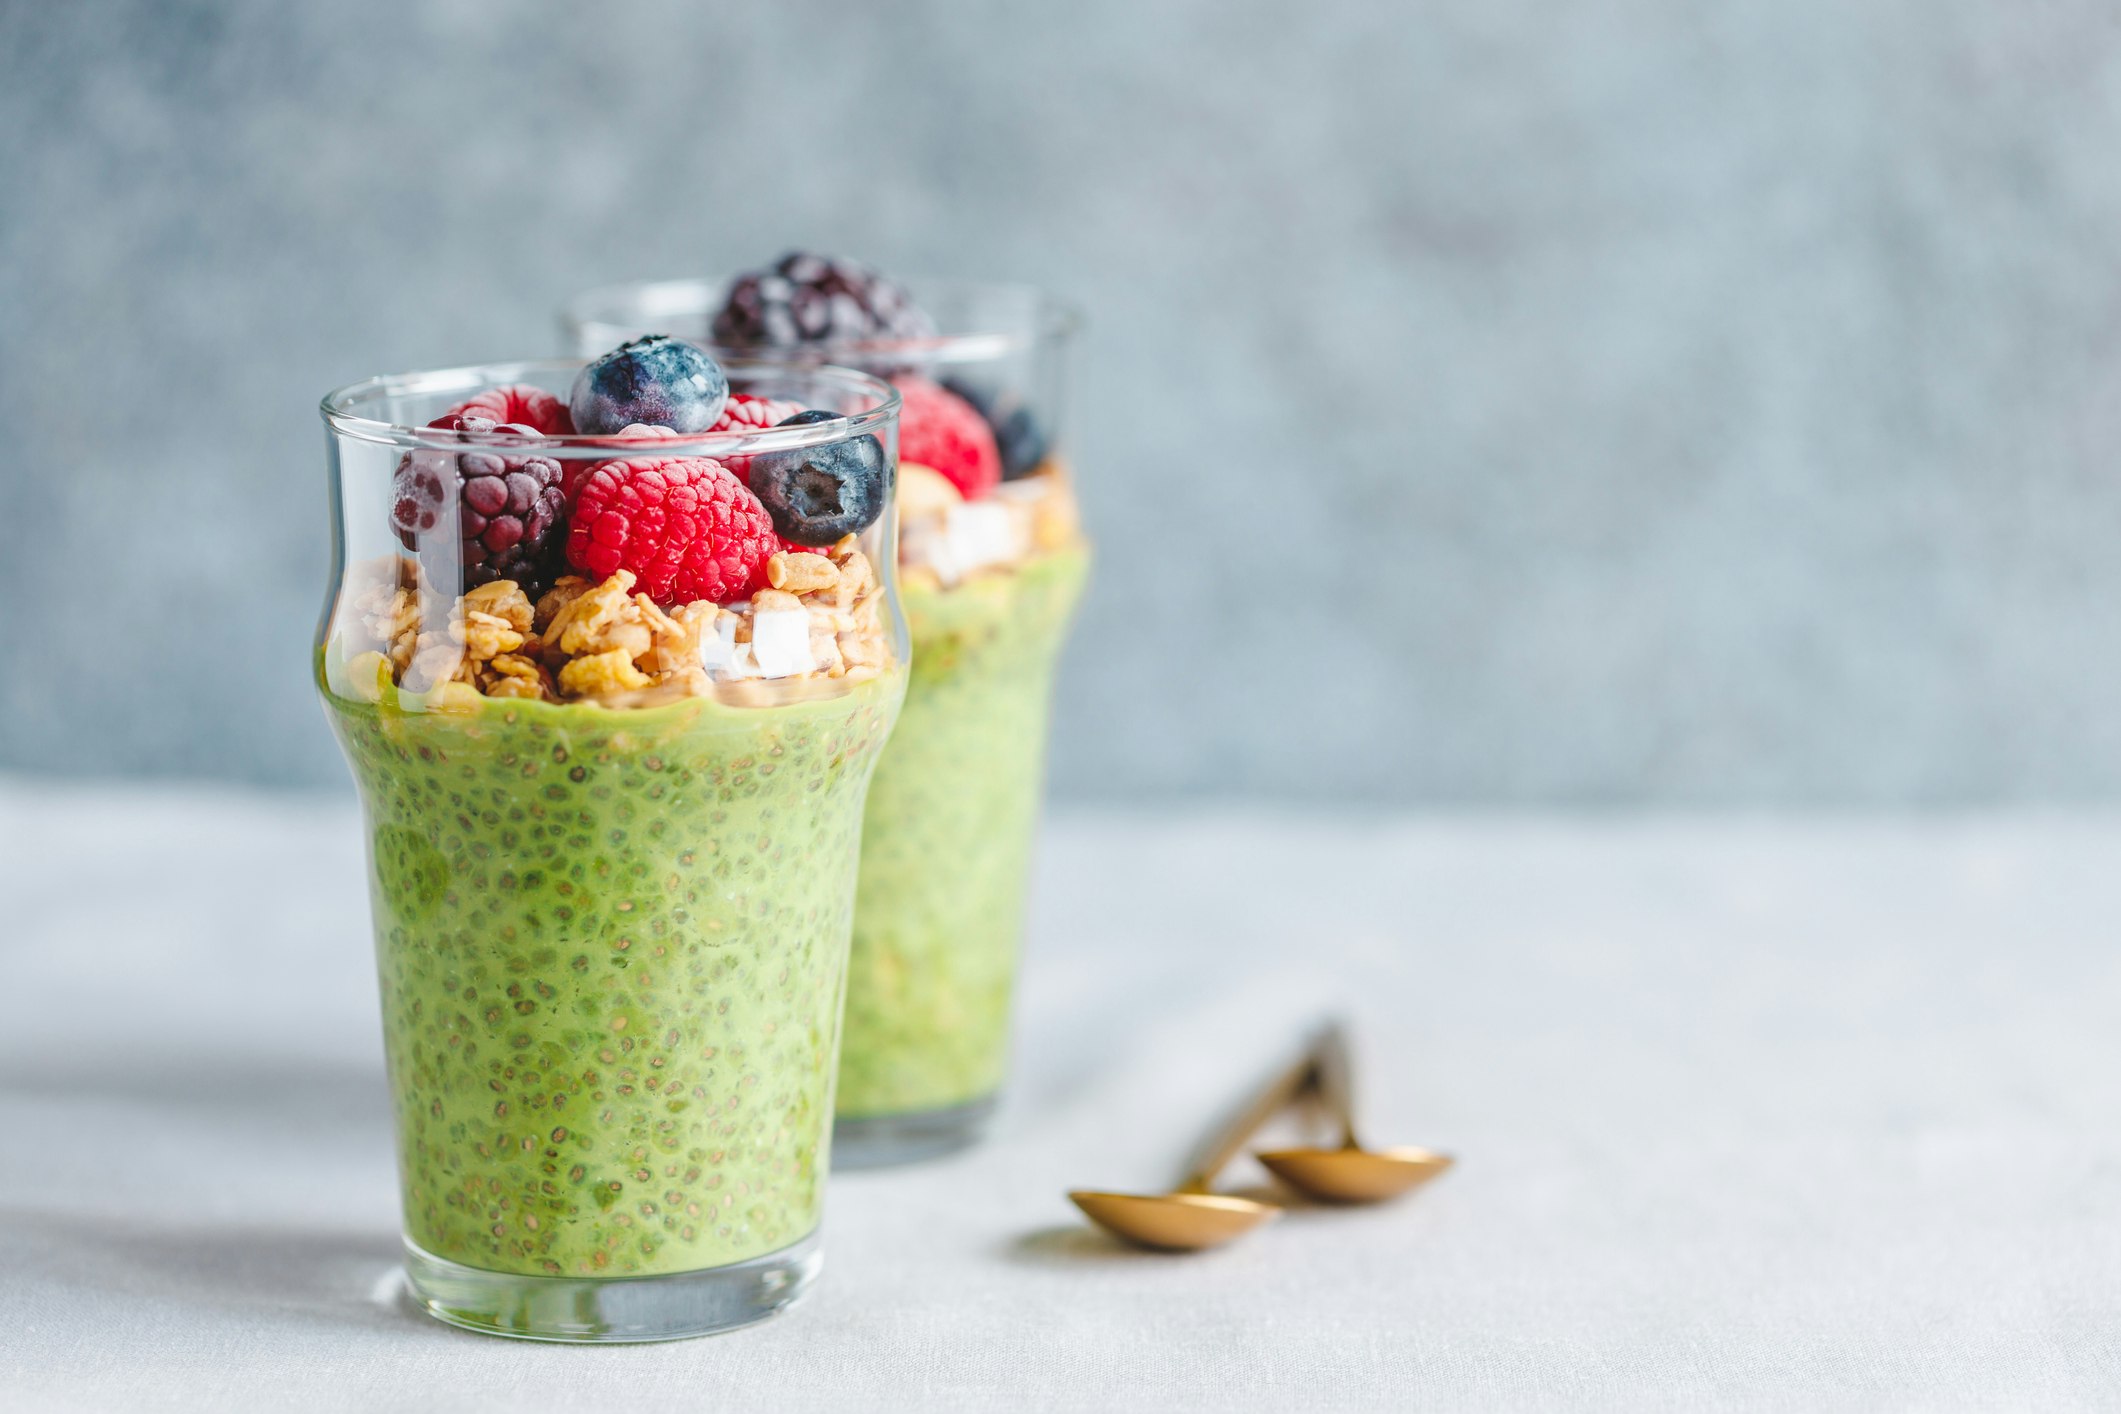 Chia pudding with matcha tea, organic granola, frozen berries in glasses.